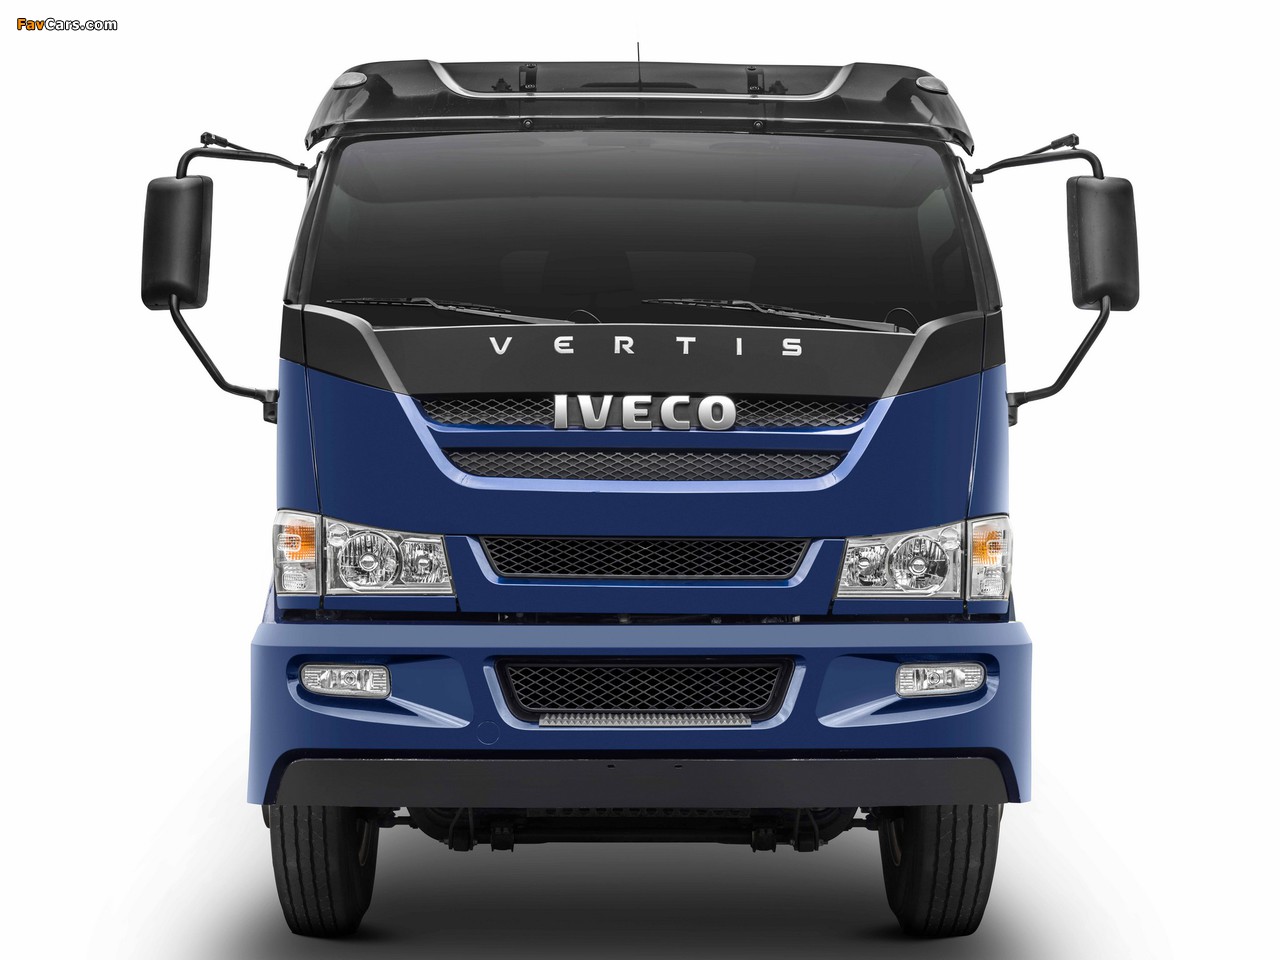 Iveco Vertis 130V 2009 wallpapers (1280 x 960)